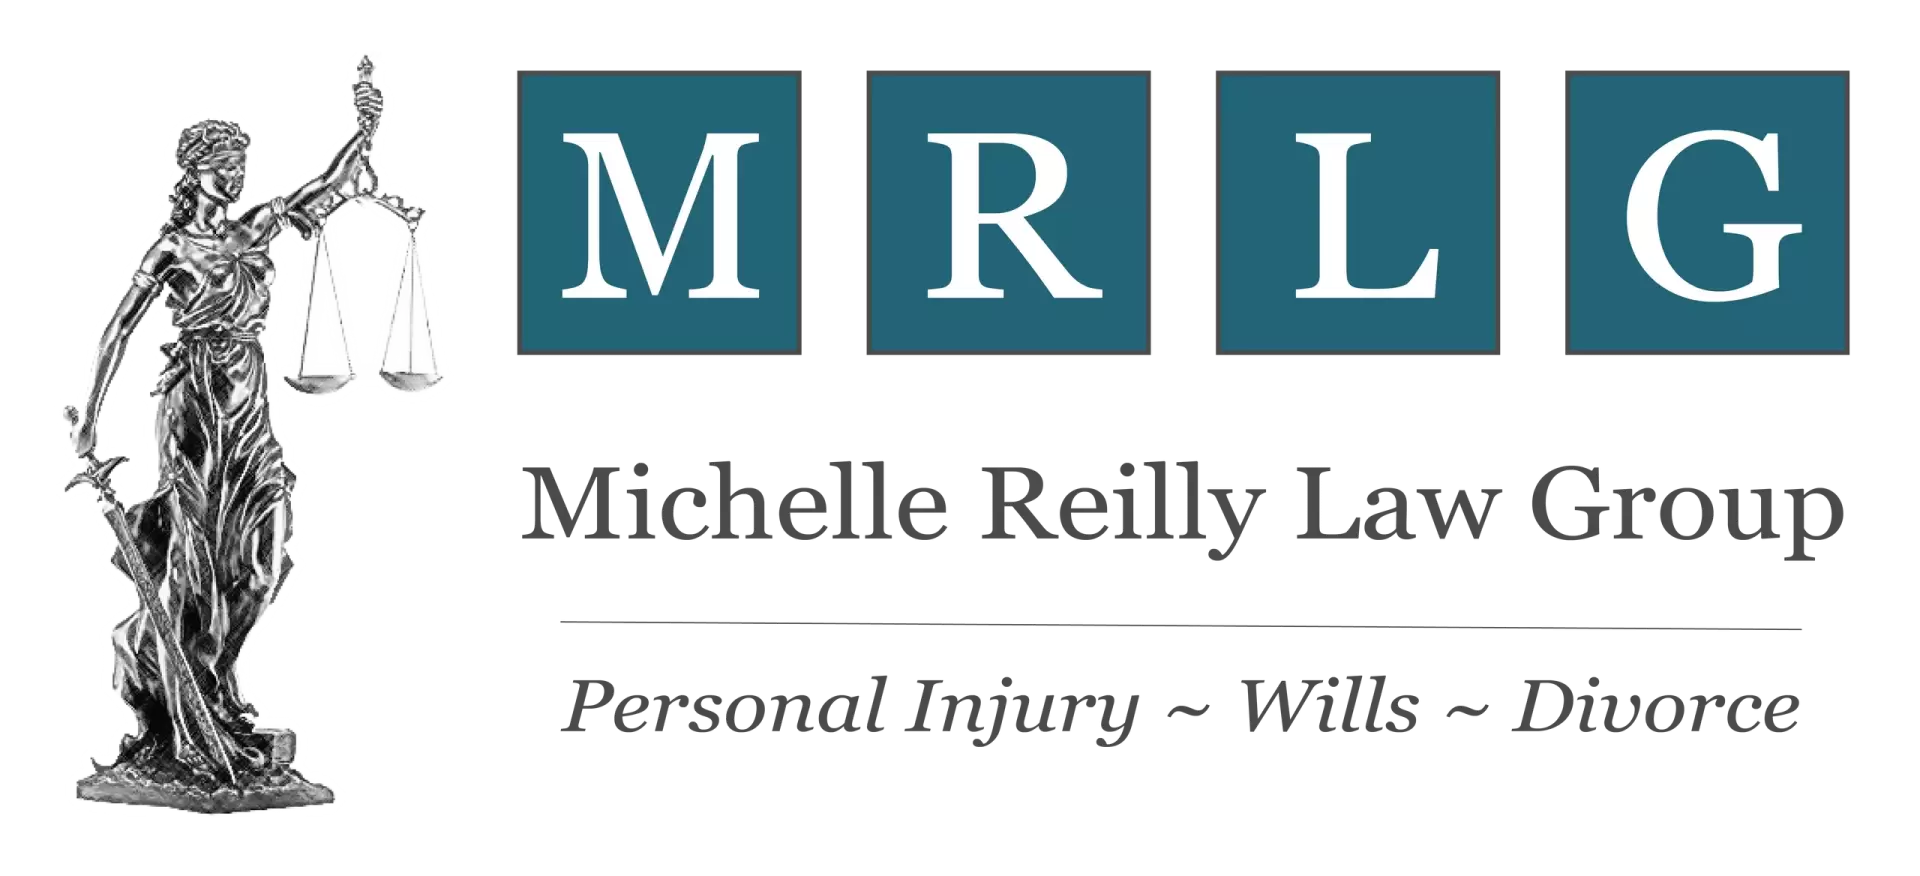 Michelle Reilly Law Group logo